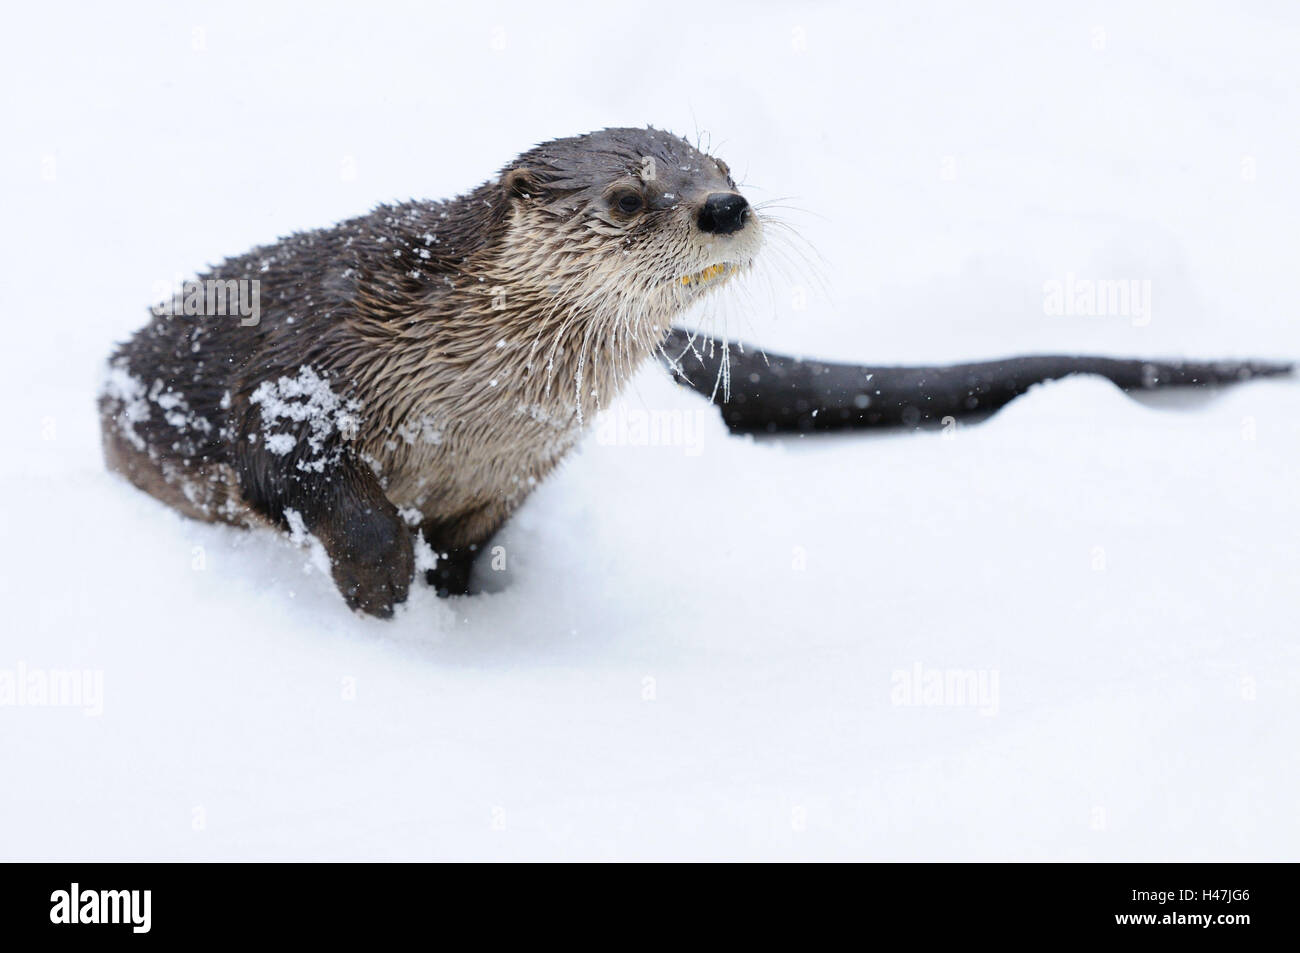 North American otter, Lontra canadensis, Stock Photo